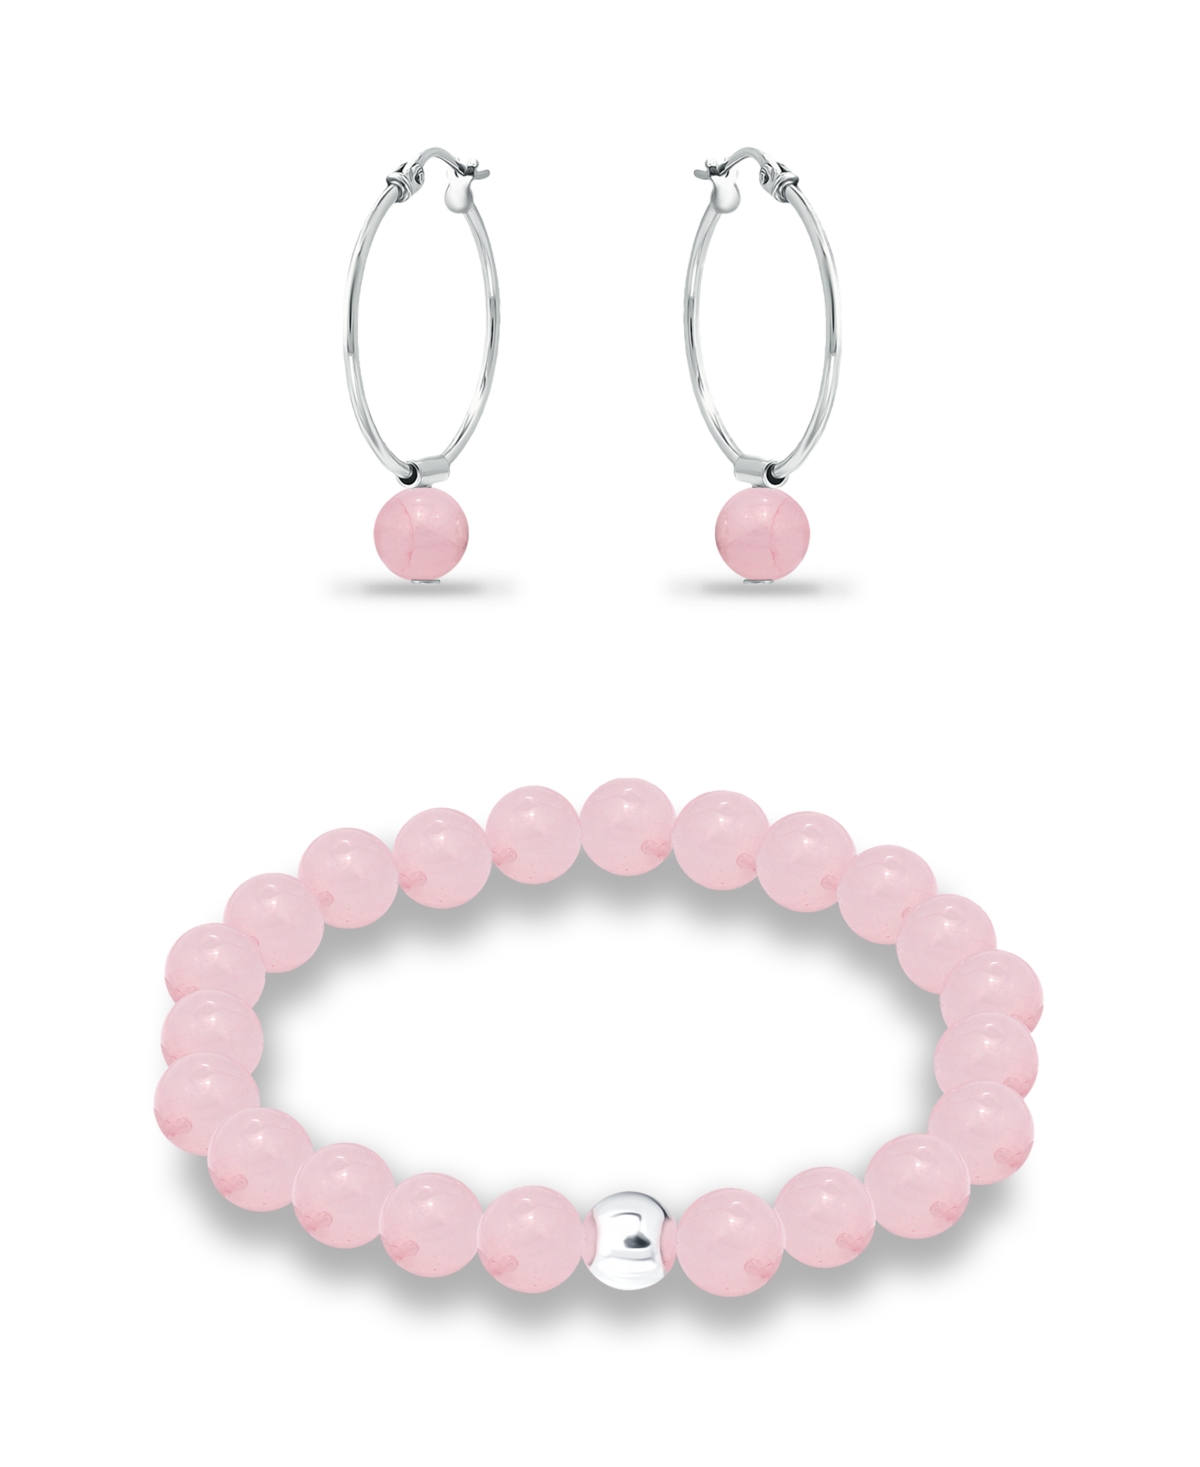 Macy's Silver Plated Multi Genuine Stone Bracelet And Earring, 2 Piece Set In Rose Quartz